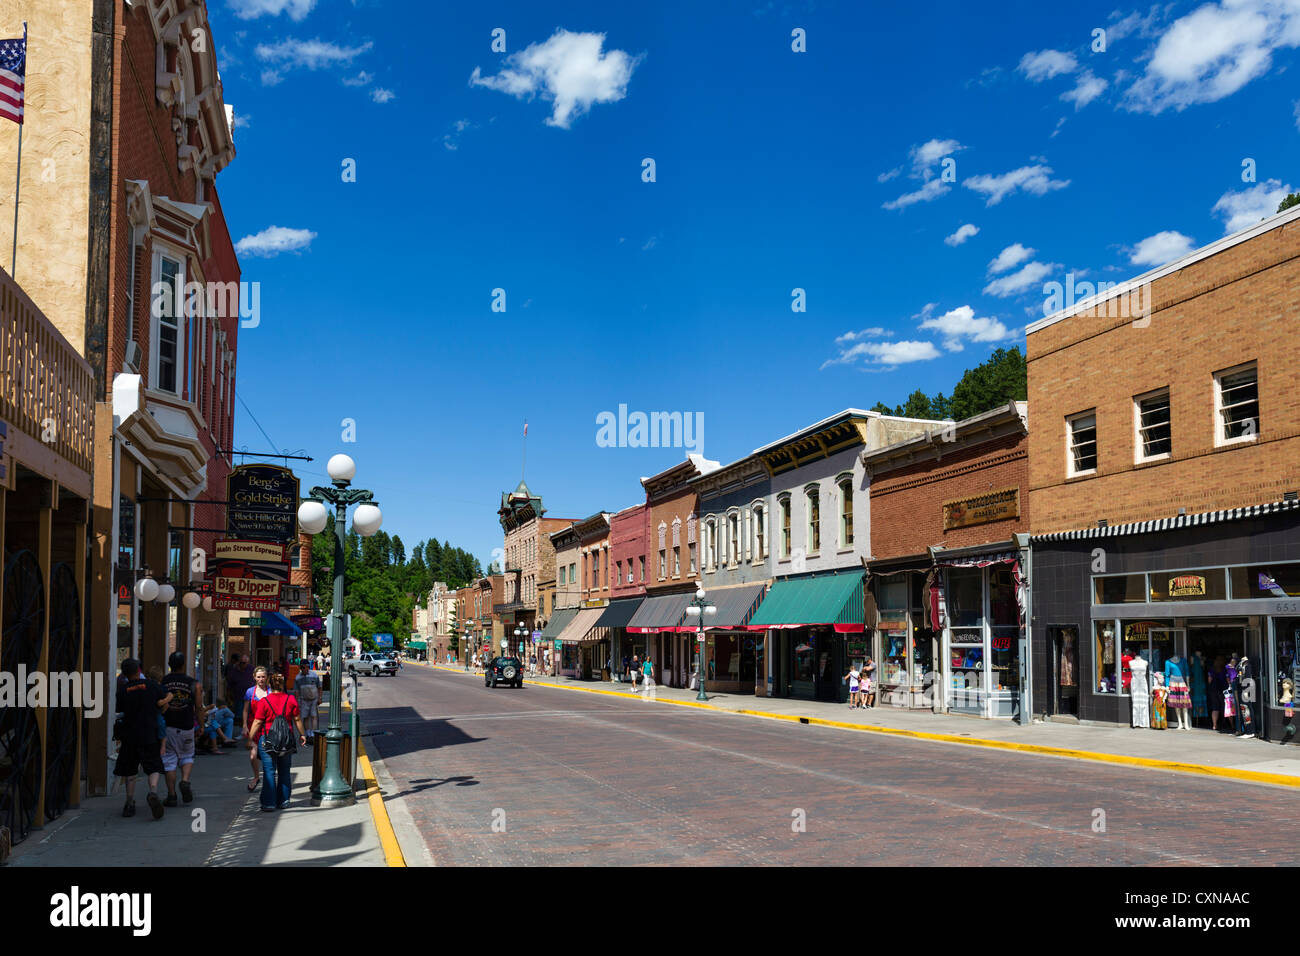 Shops and bars on Main Street in the historic town of Deadwood, South Dakota, USA Stock Photo